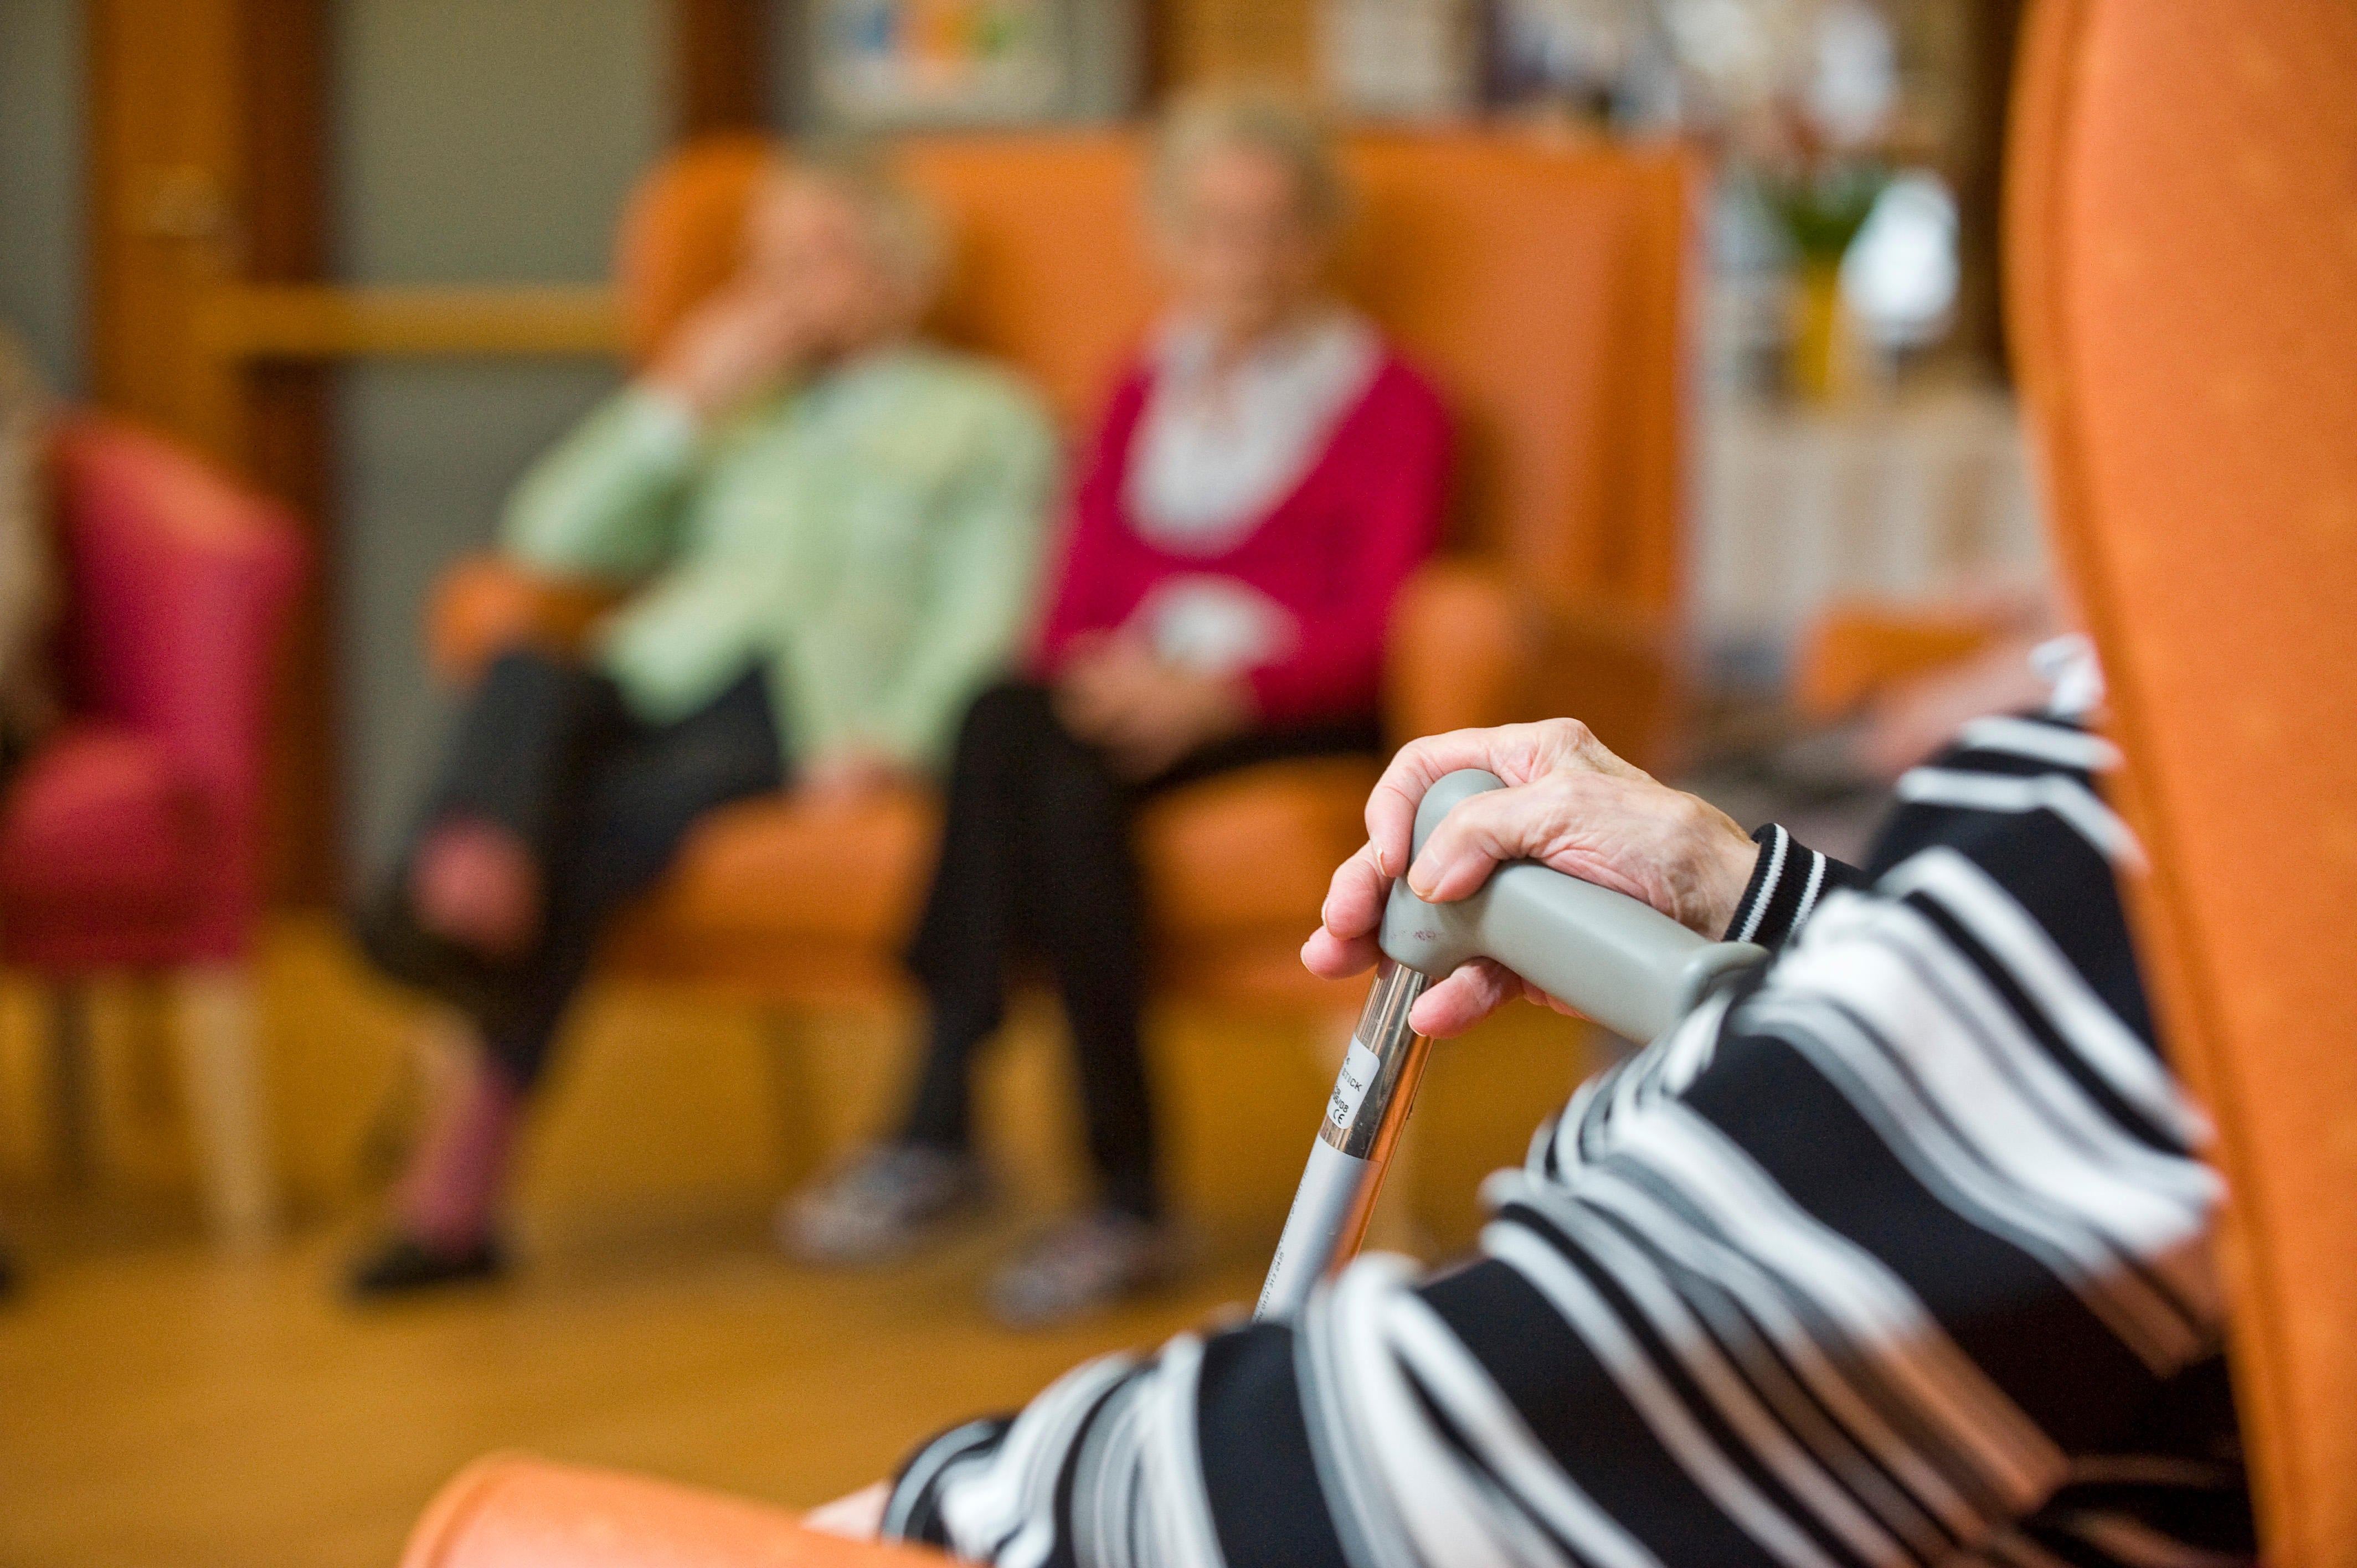 New figures suggest more than a fifth of care home beds in England are unfilled (Ian Georgeson/Alamy/PA)